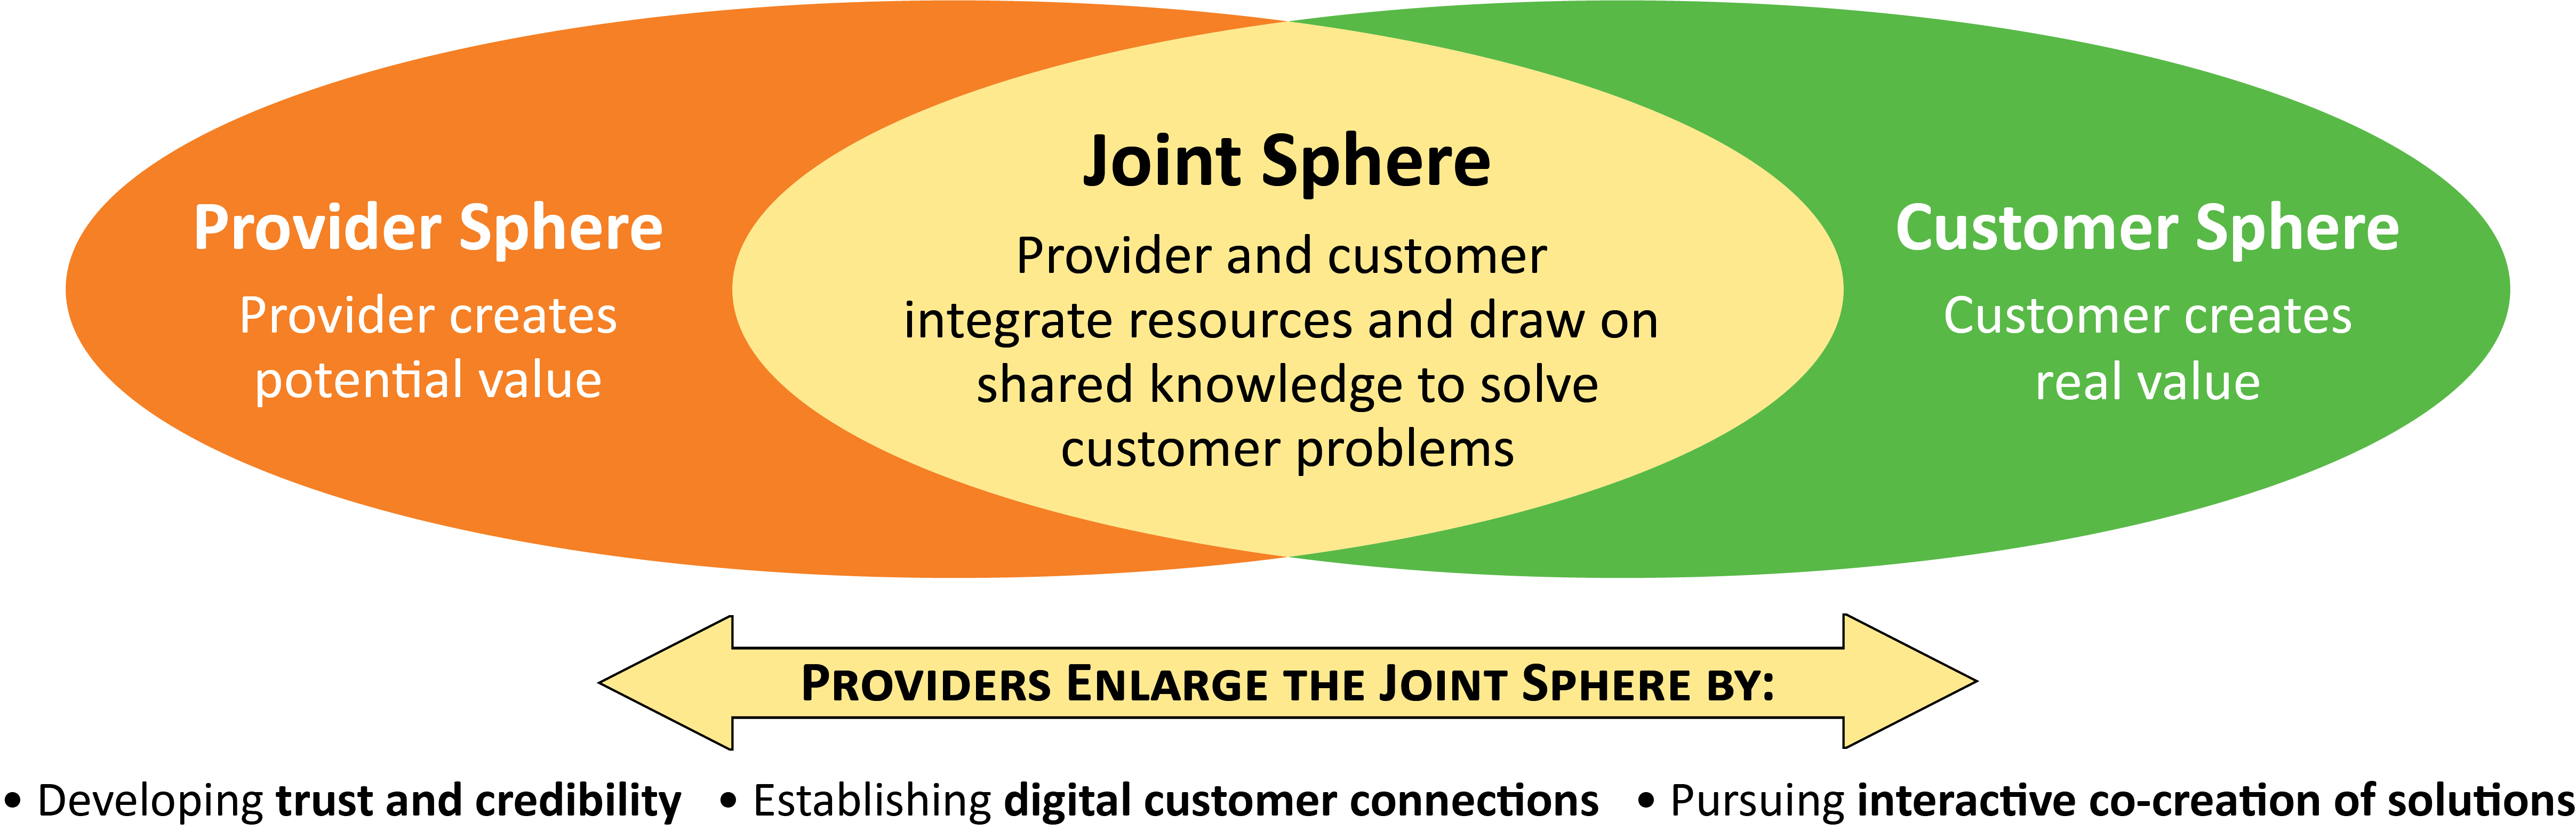 The Provider-Customer Joint Sphere Graphic. The intersection of the Provider Sphere and Customer Sphere is the Joint Sphere.